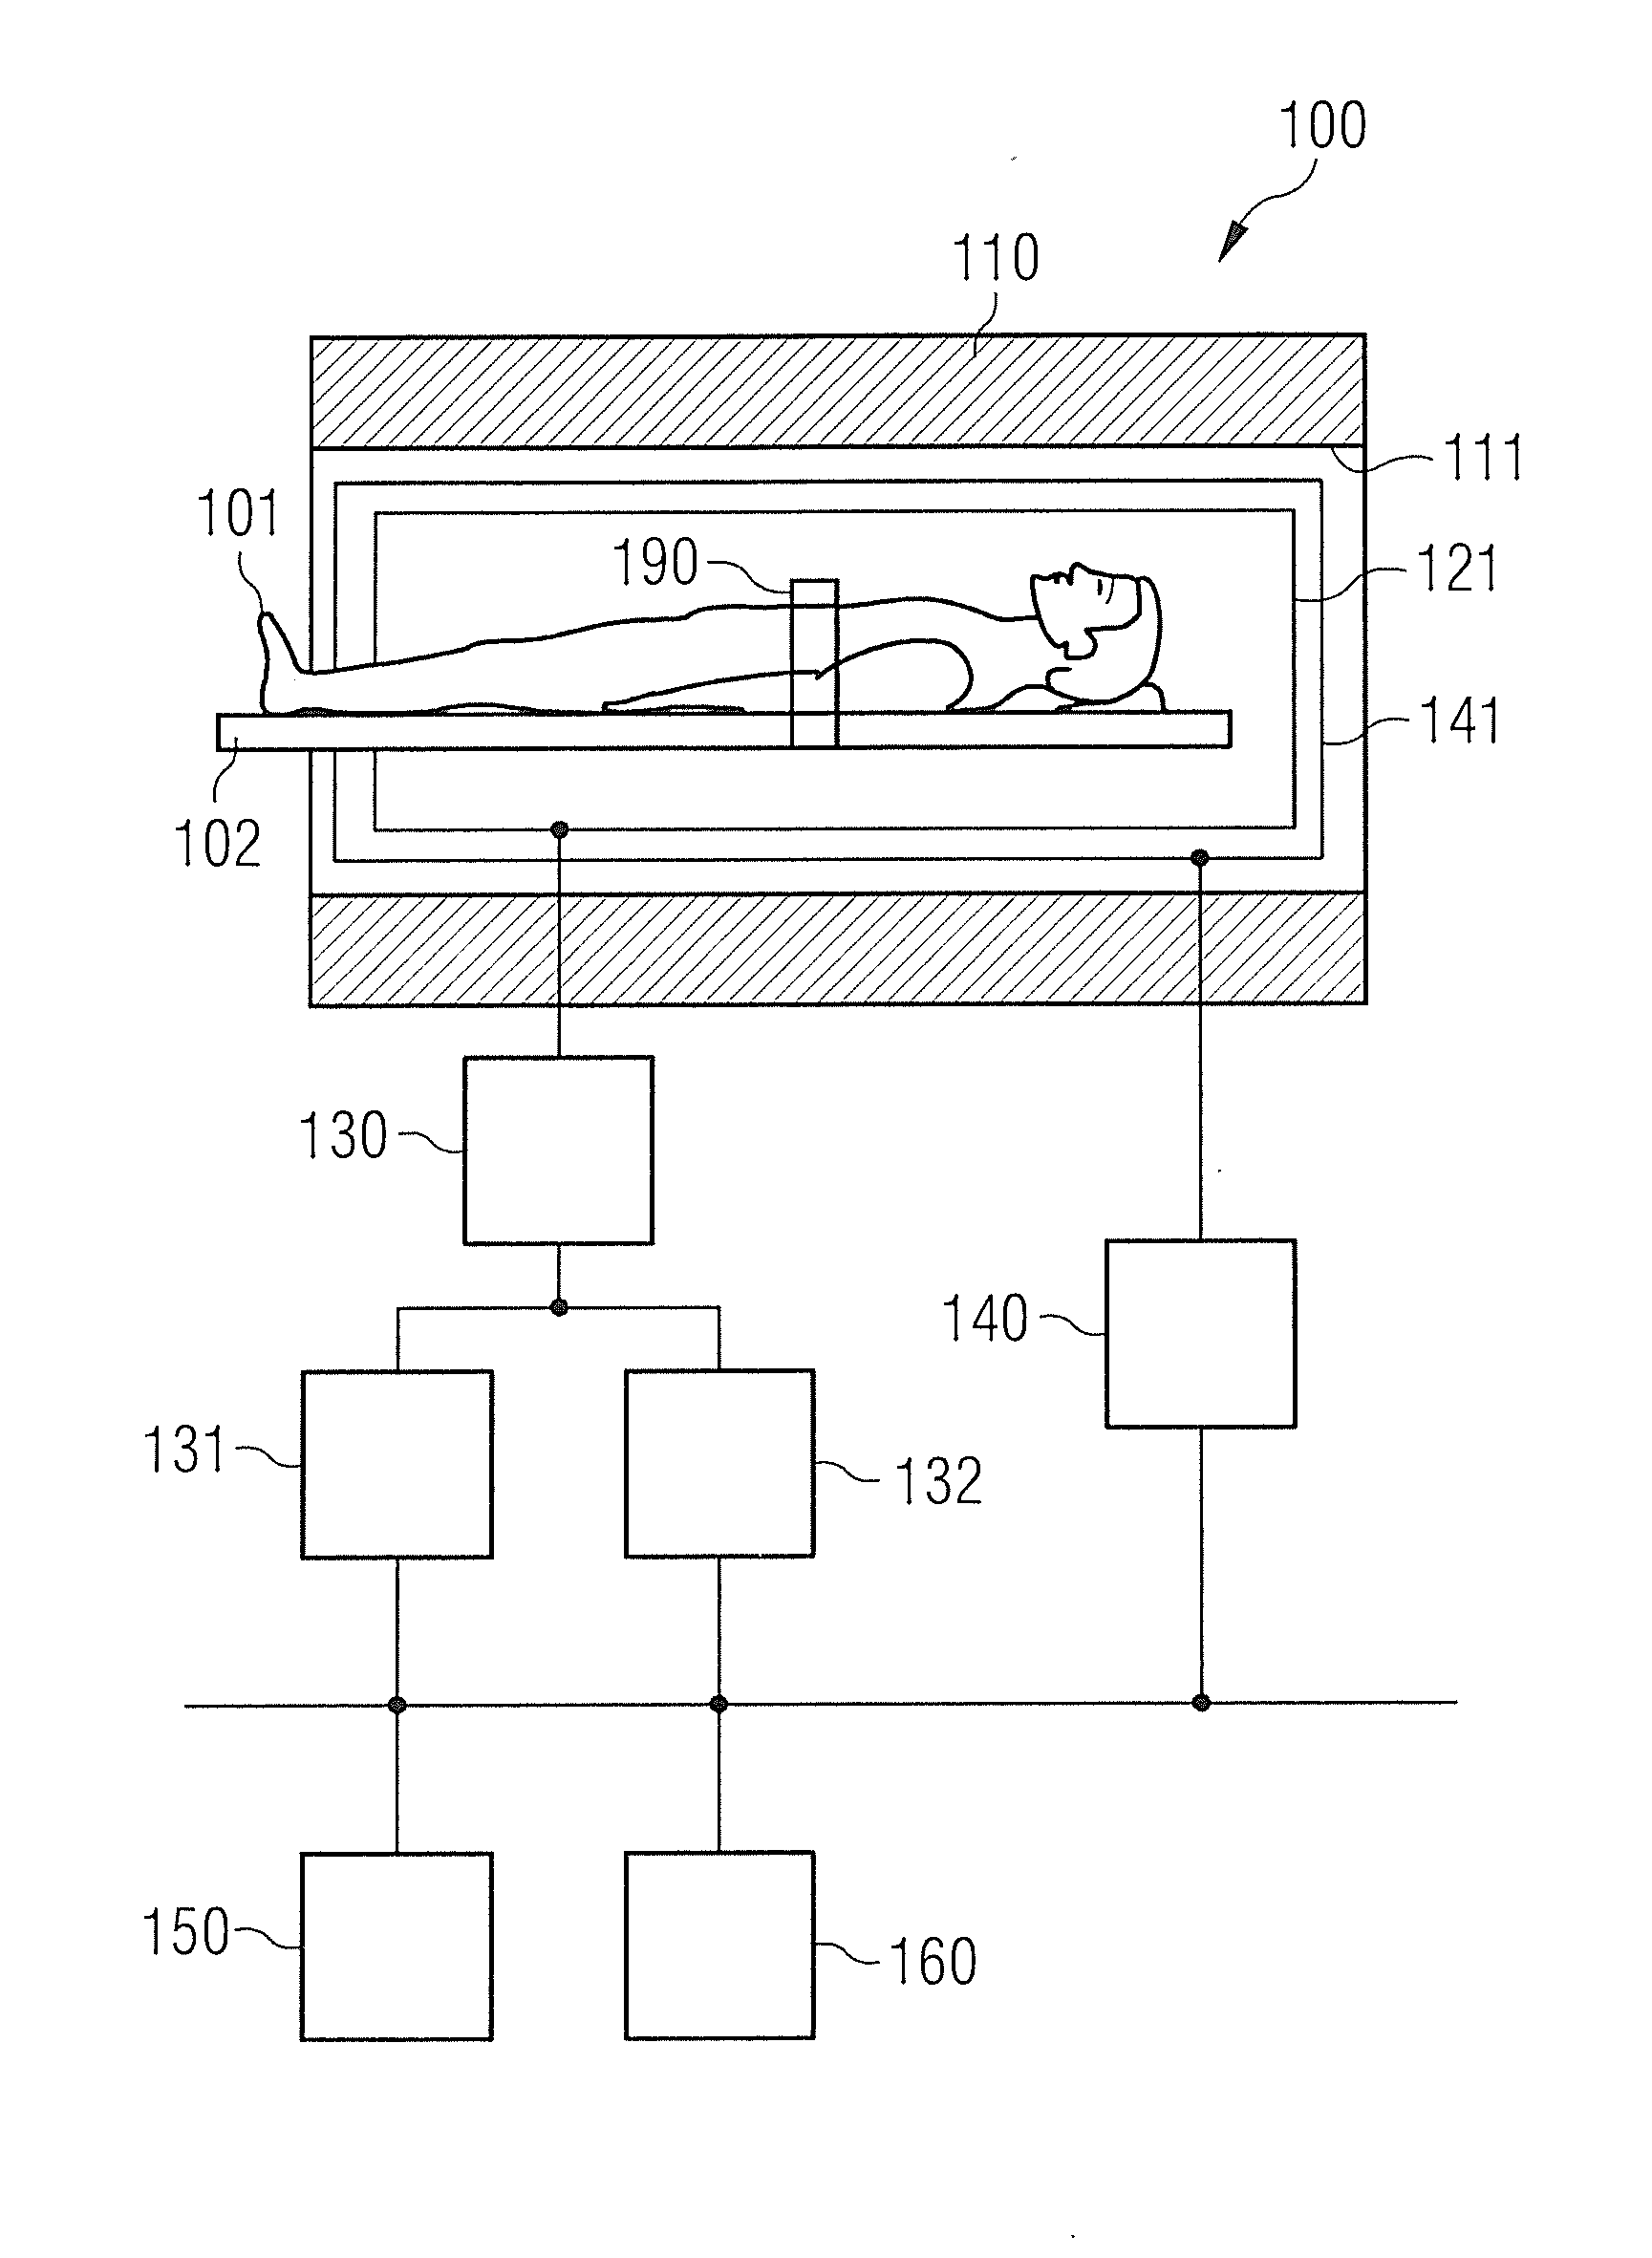 Method and apparatus for accelerated magnetic resonance imaging